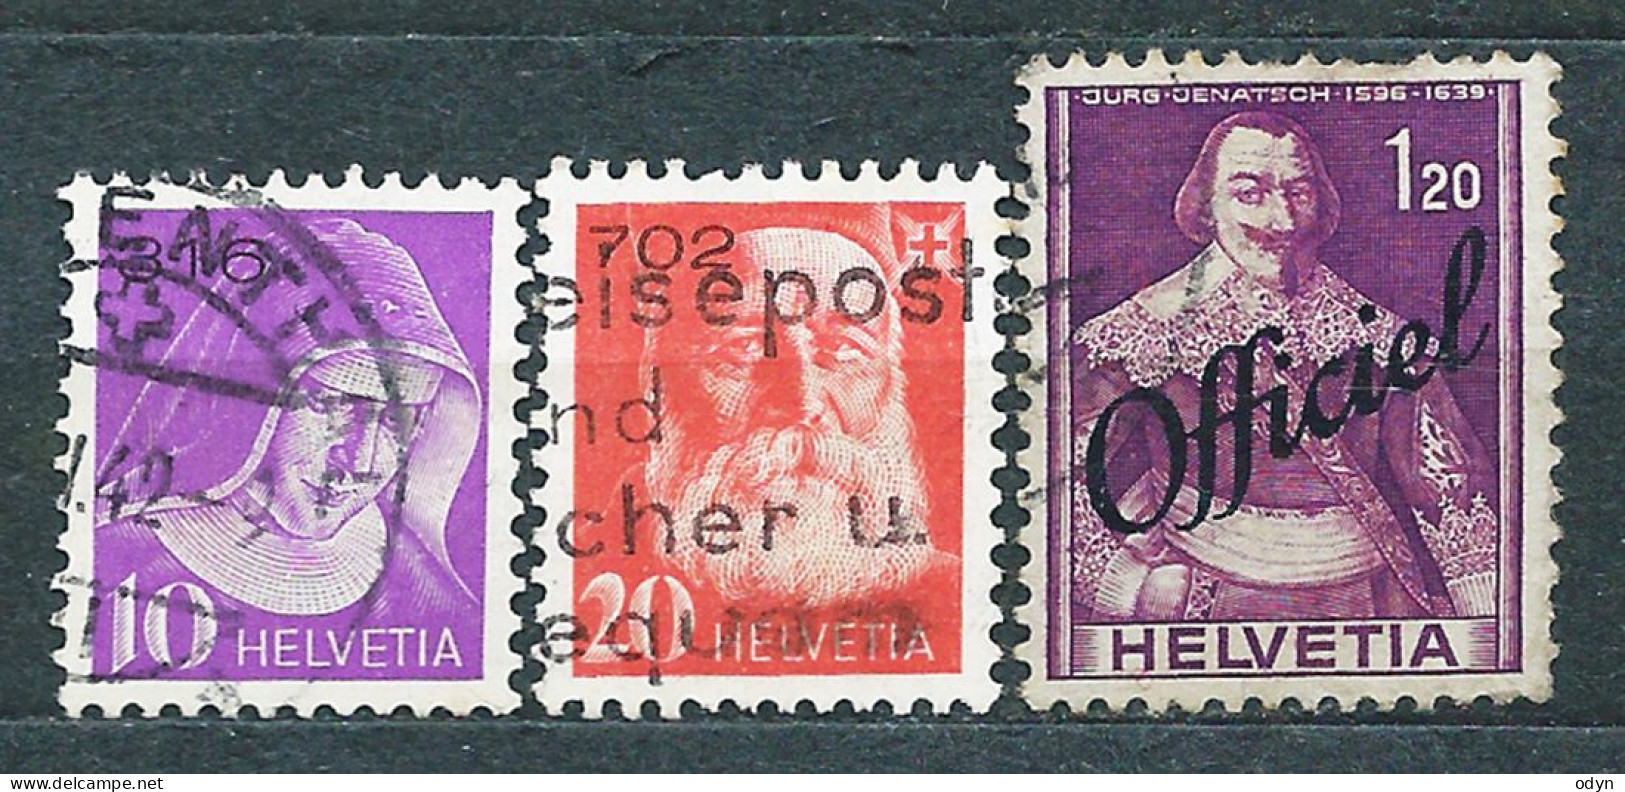 Switzerland, 1878-1938, Lot Of 42 Postal Due Stamps From Sets MiNr 1-9, 2-5, 8-10, 15-16, 17-20, 29-37 32-36 42-49 54-61 - Taxe